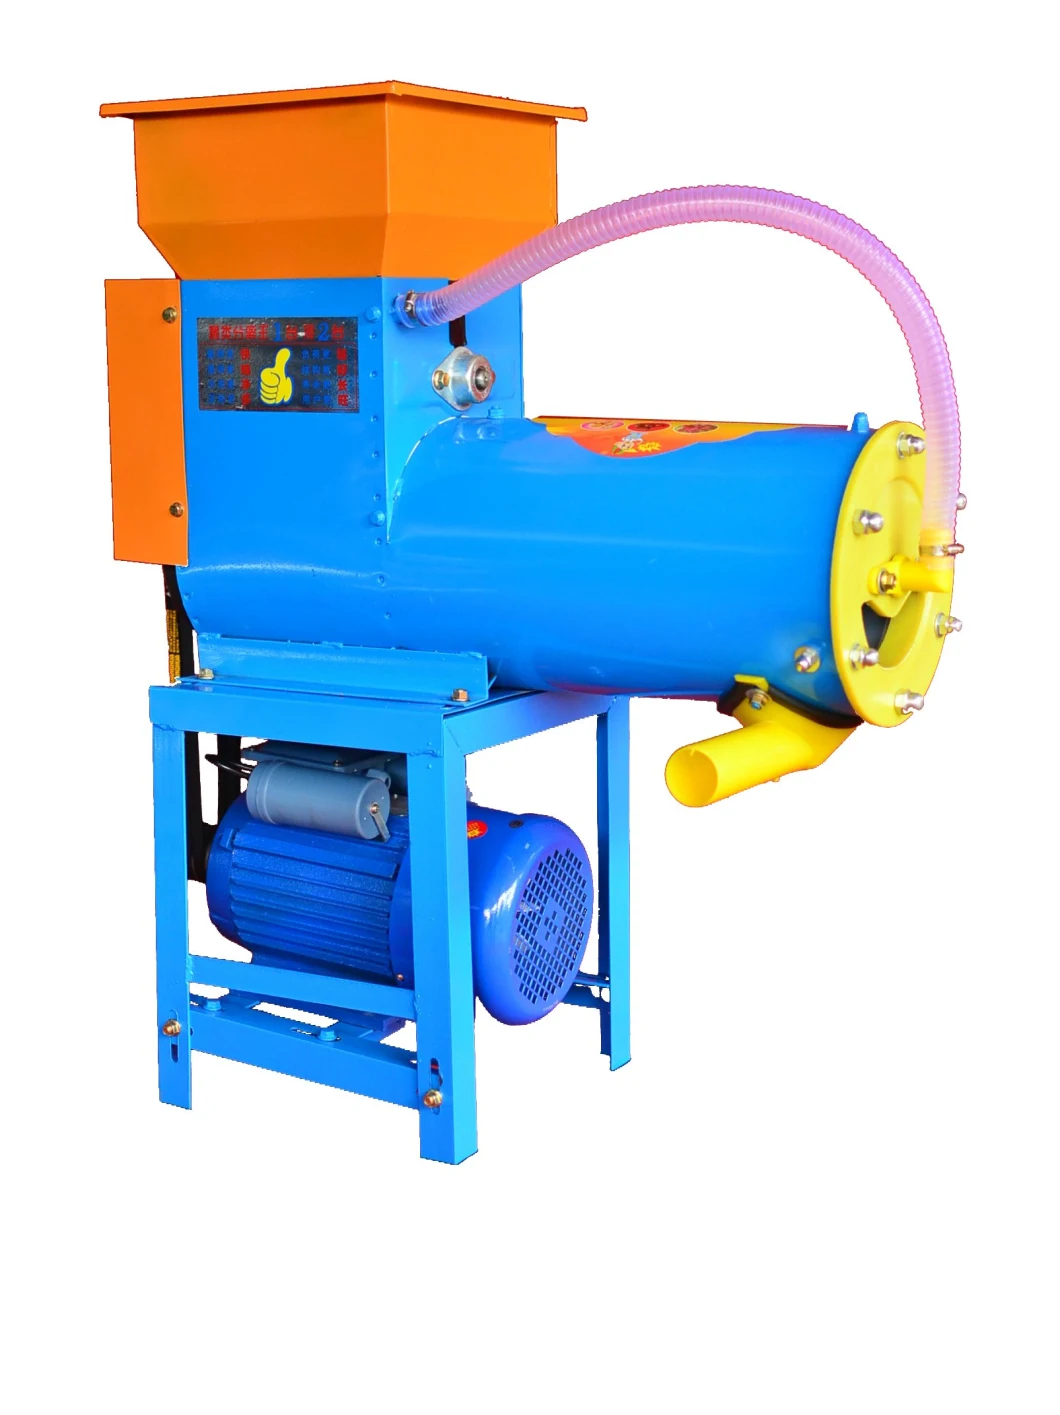 Low Cost Food Processing Machine Potato Starch Separator or Starch Separator